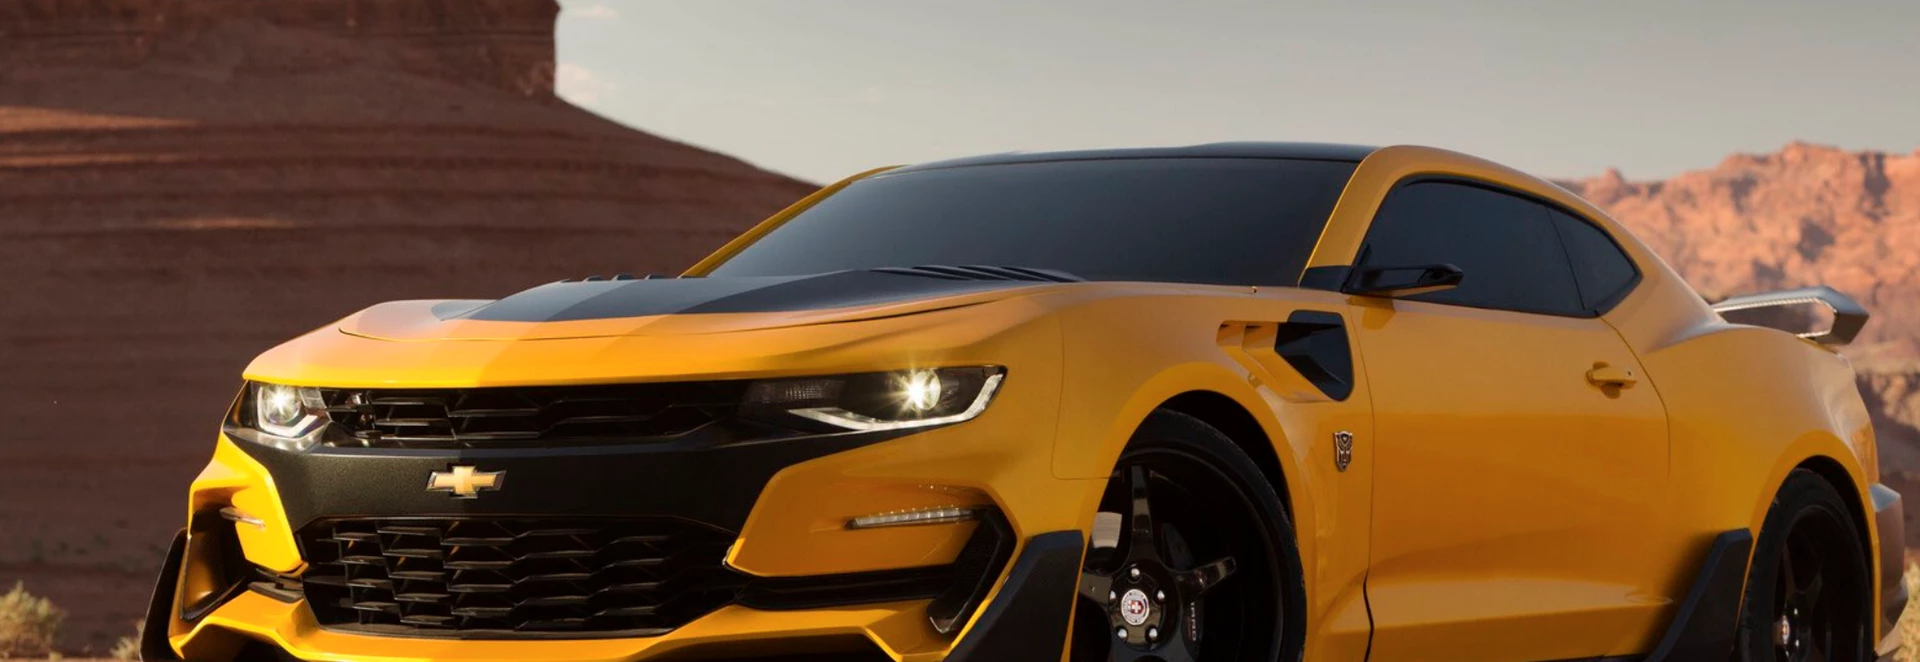 Check out Bumblebee's new look for Transformers 5 